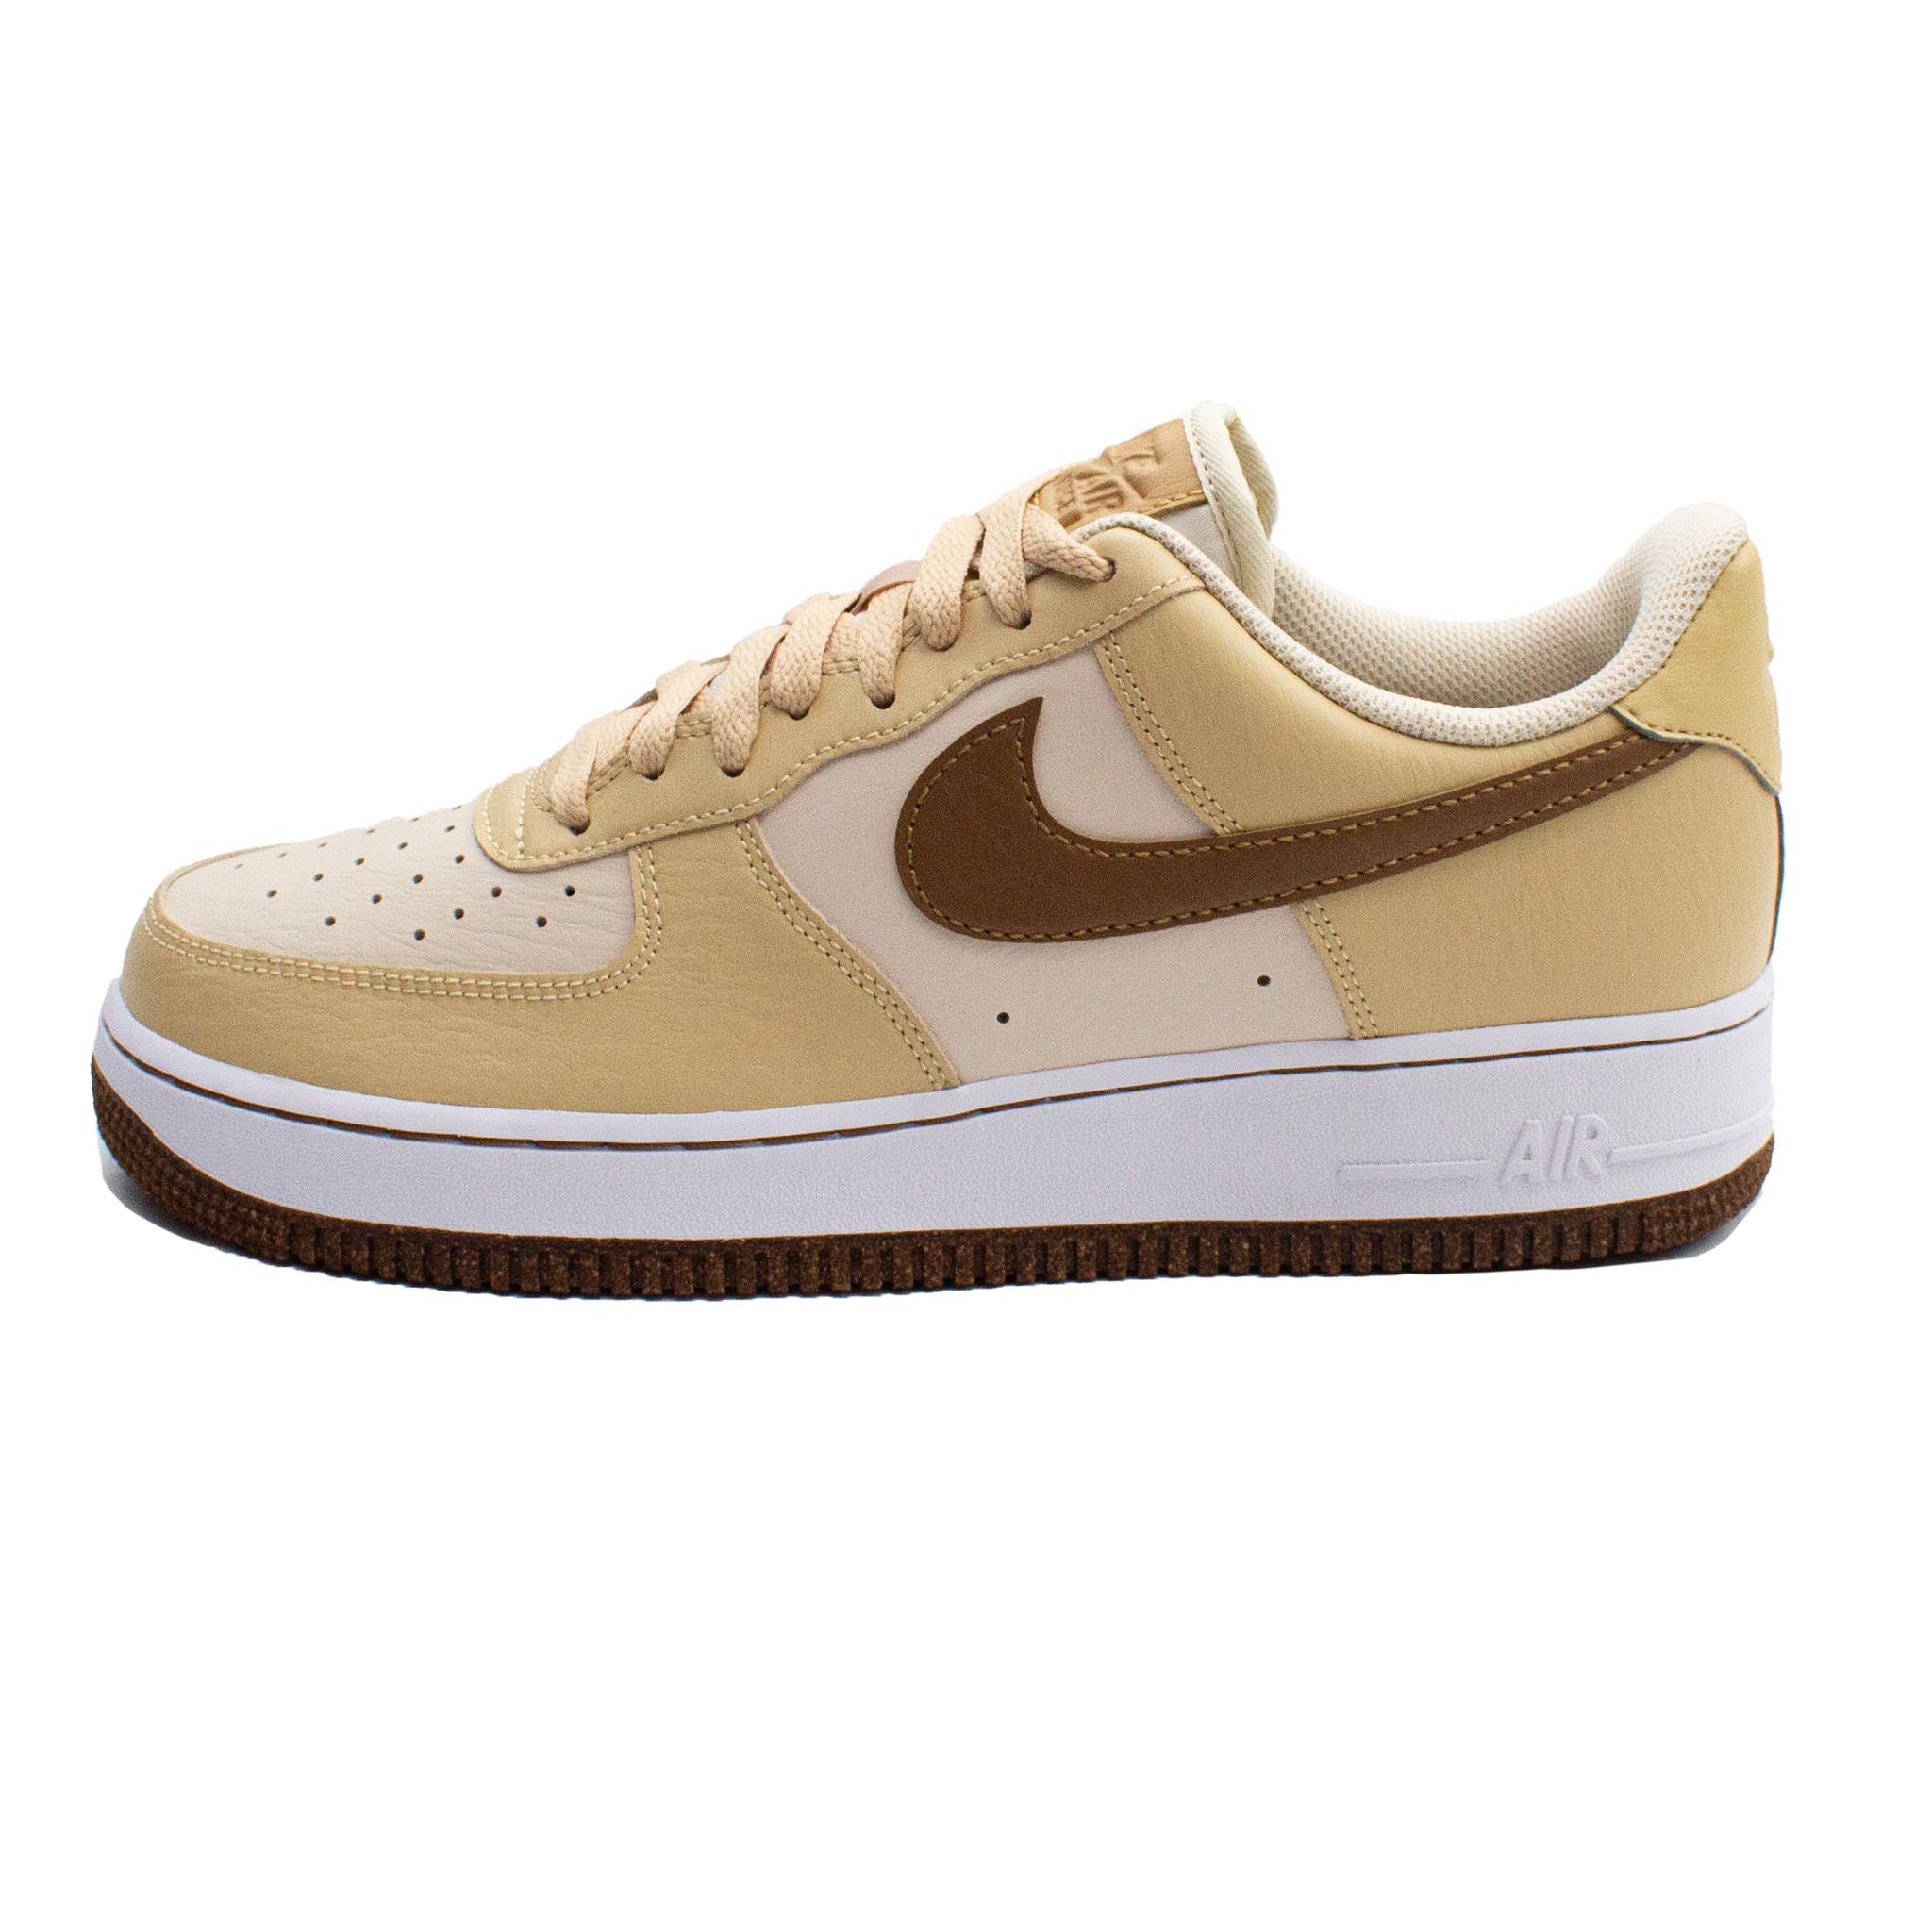 Nike Air Force 1 '07 LV8 'Inspected By Swoosh'